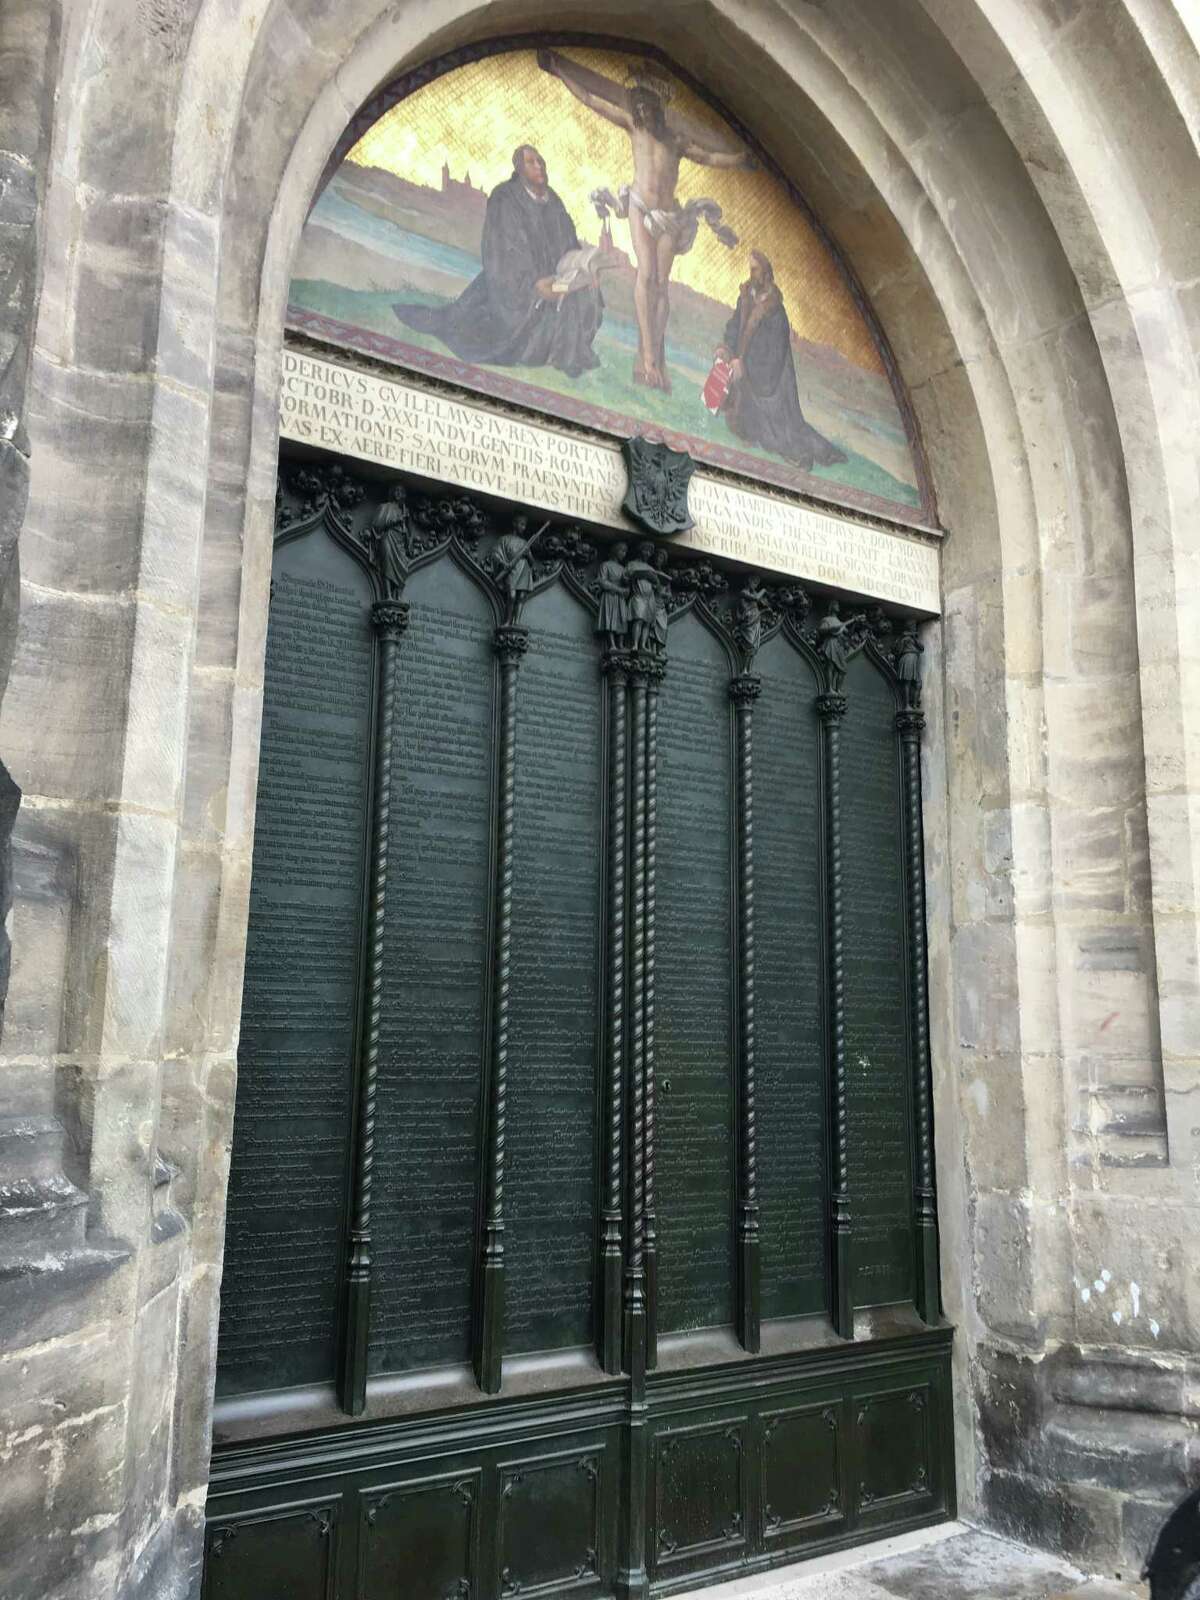 The church doors in Wittenberg, Germany, where Martin Luther nailed his 95 Theses 500 years ago, sparking religious and cultural effects still felt today.